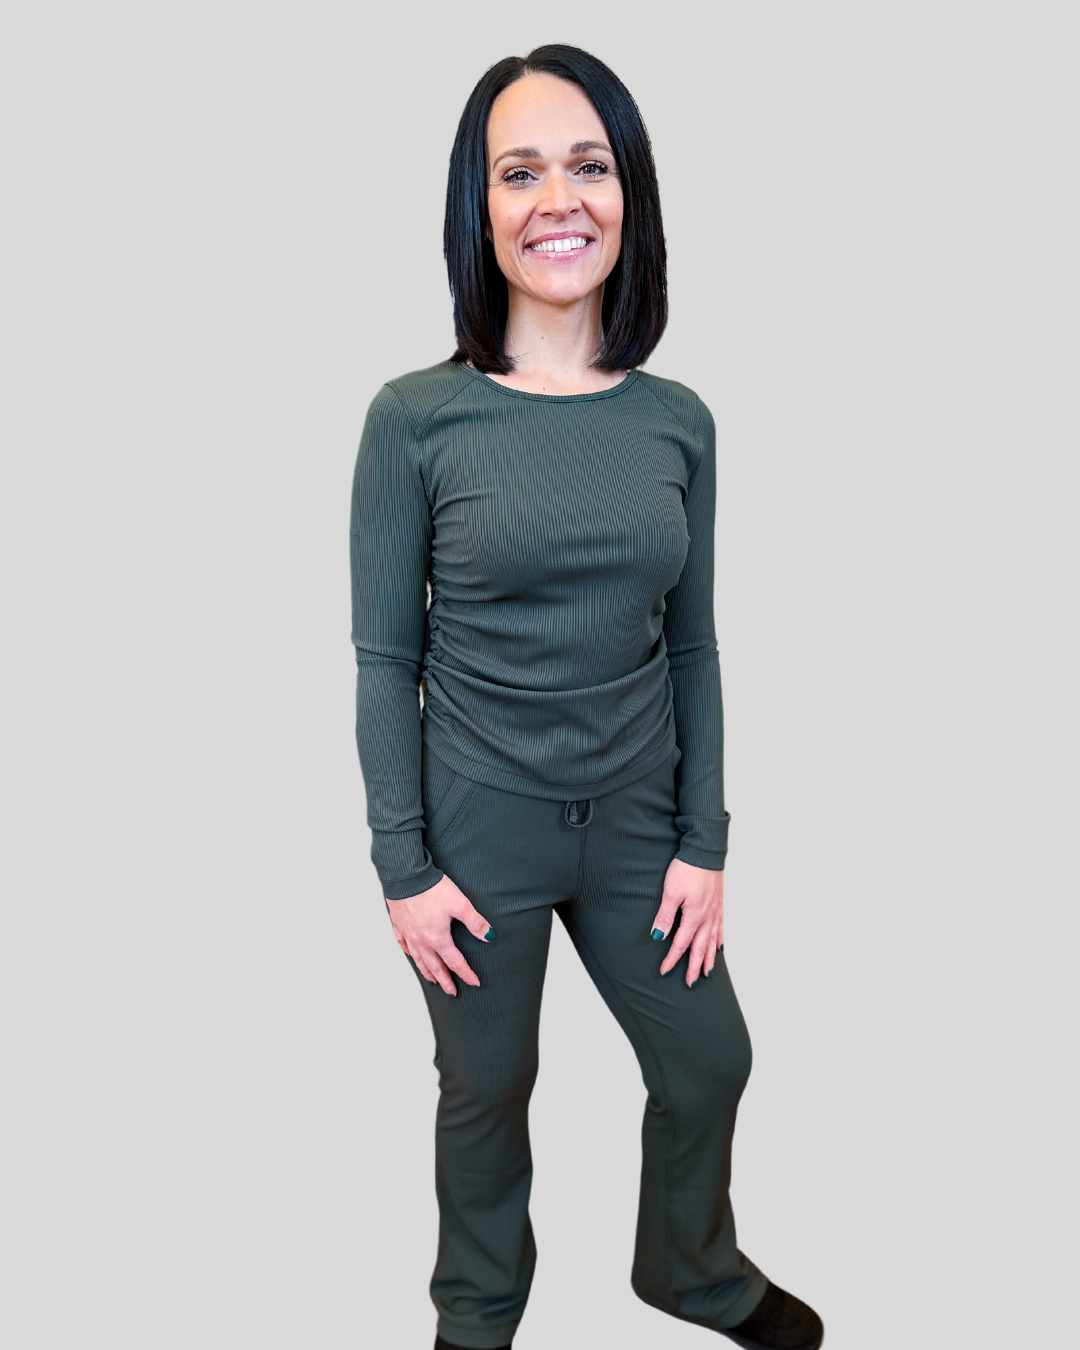 Sky Shirred Side Top in Hunter Green by Cream Yoga